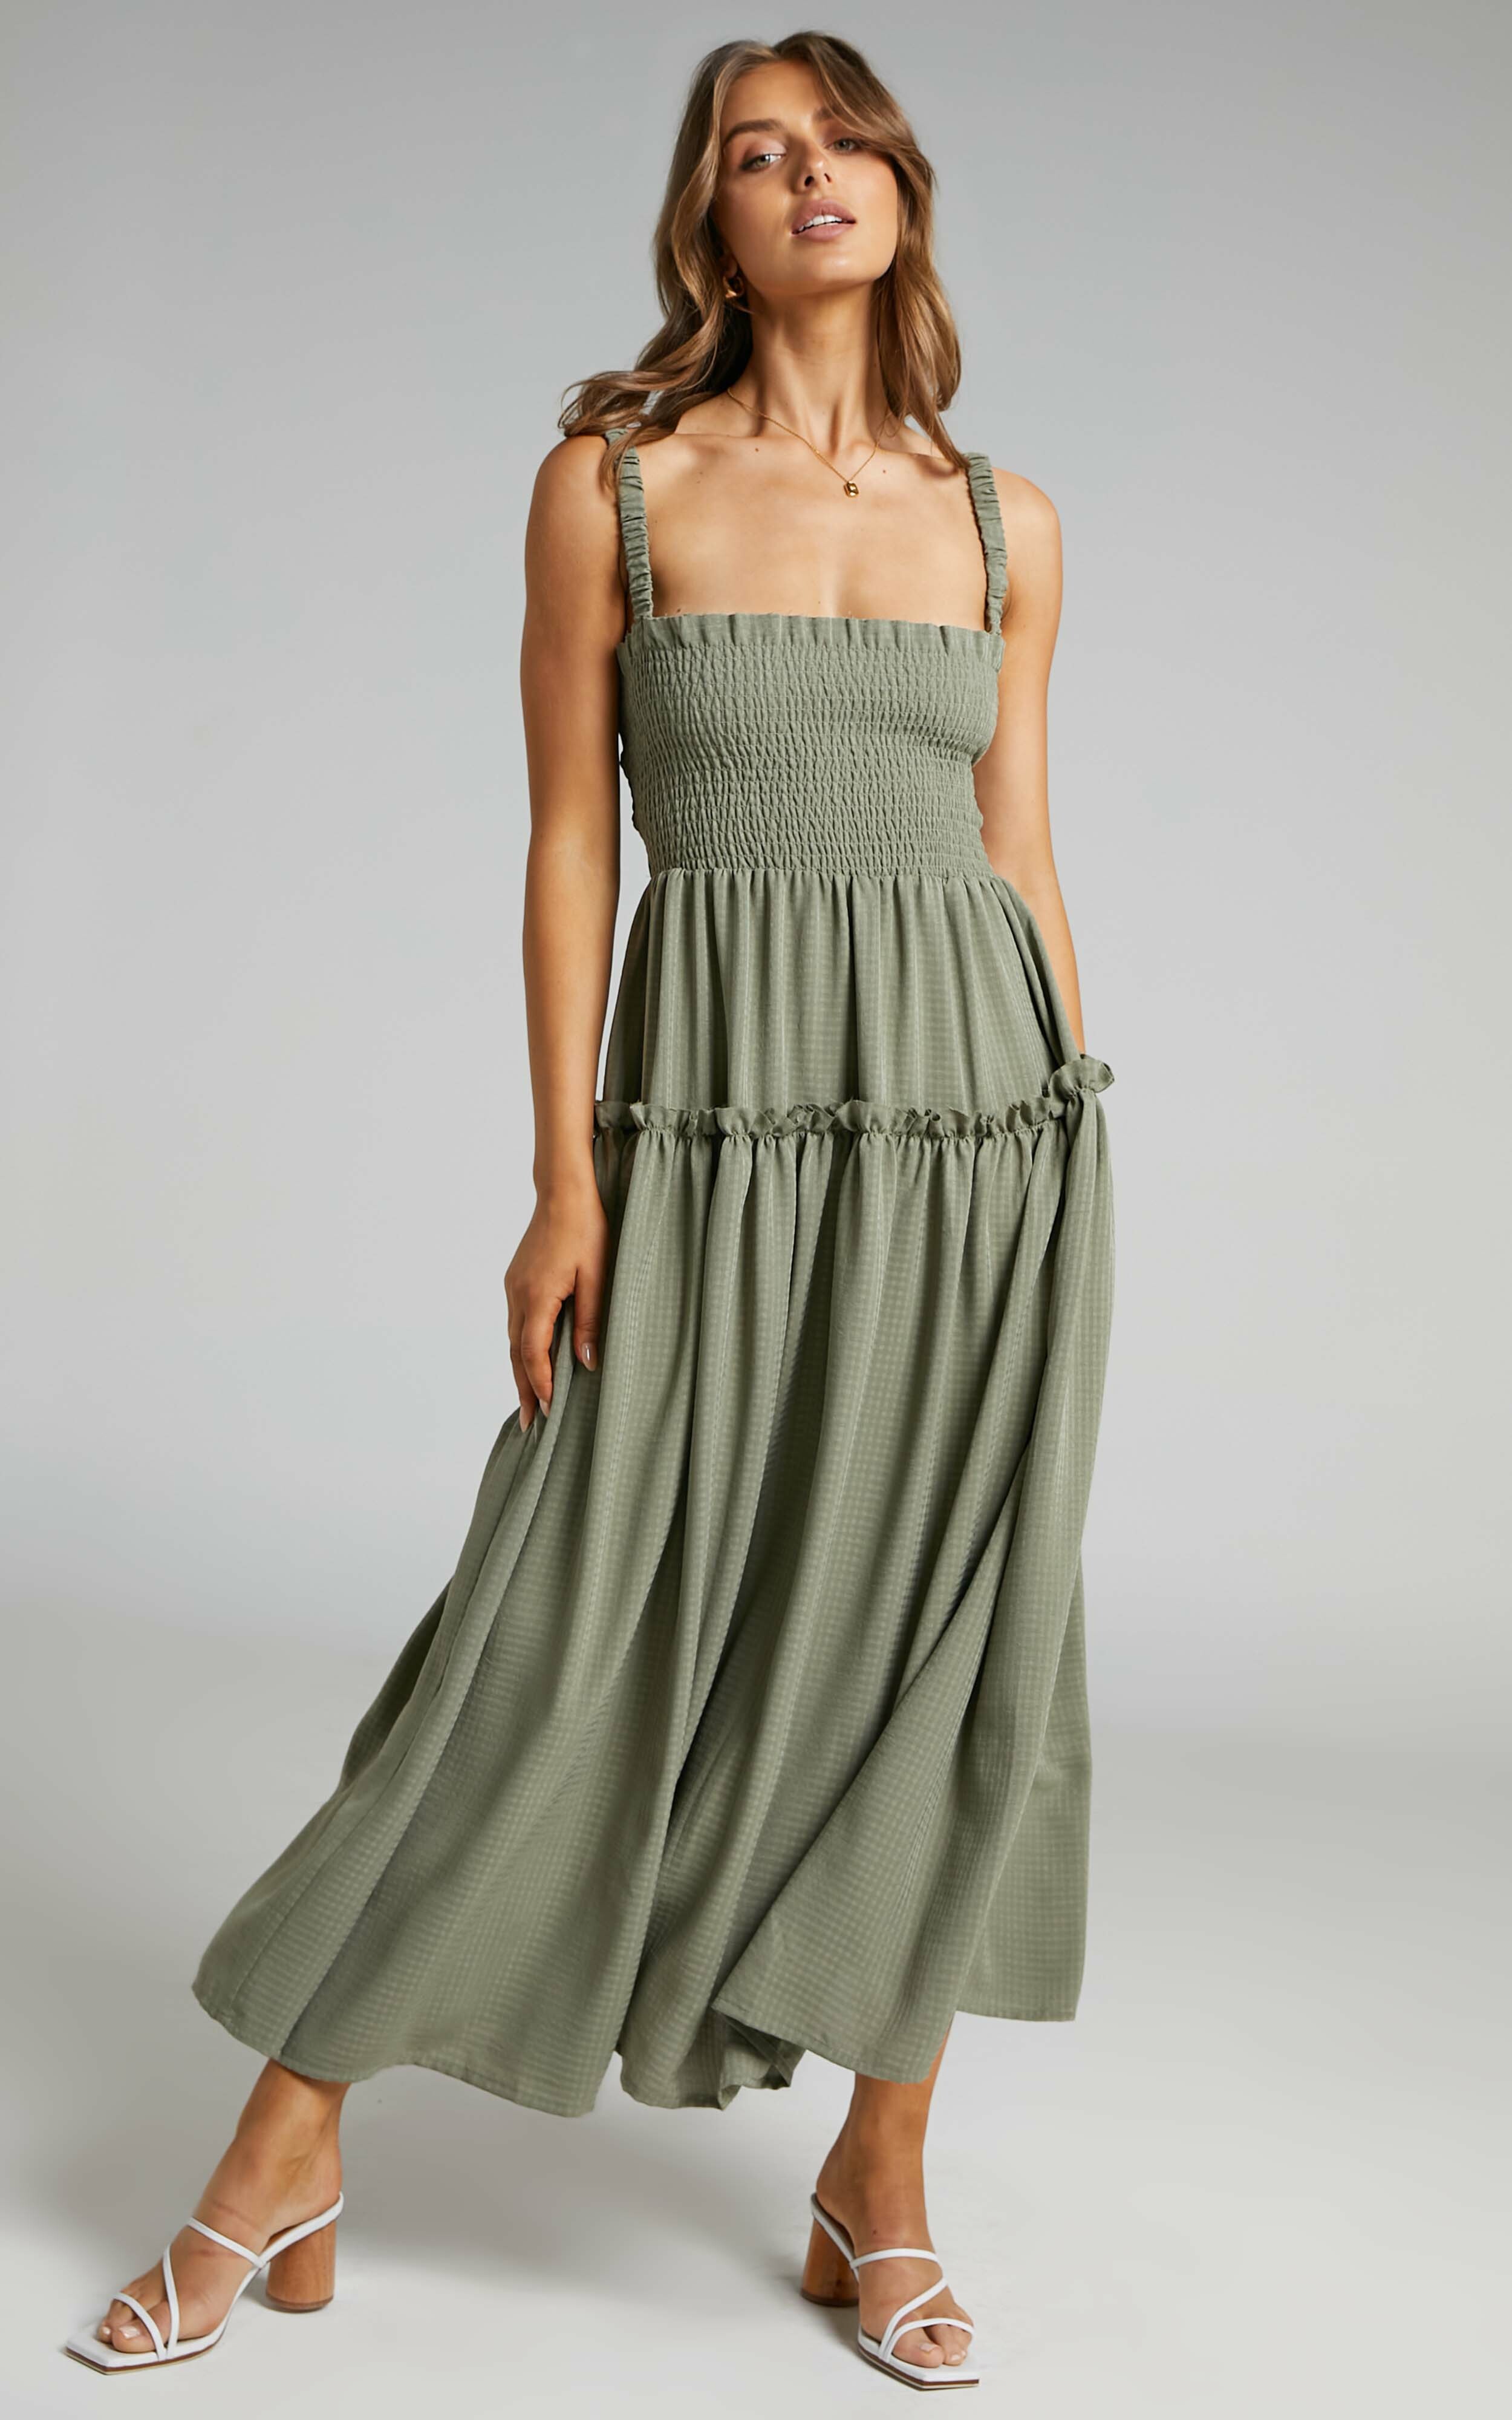 Khayeen Shirred Bodice Maxi Dress in Khaki - 04, GRN1, hi-res image number null